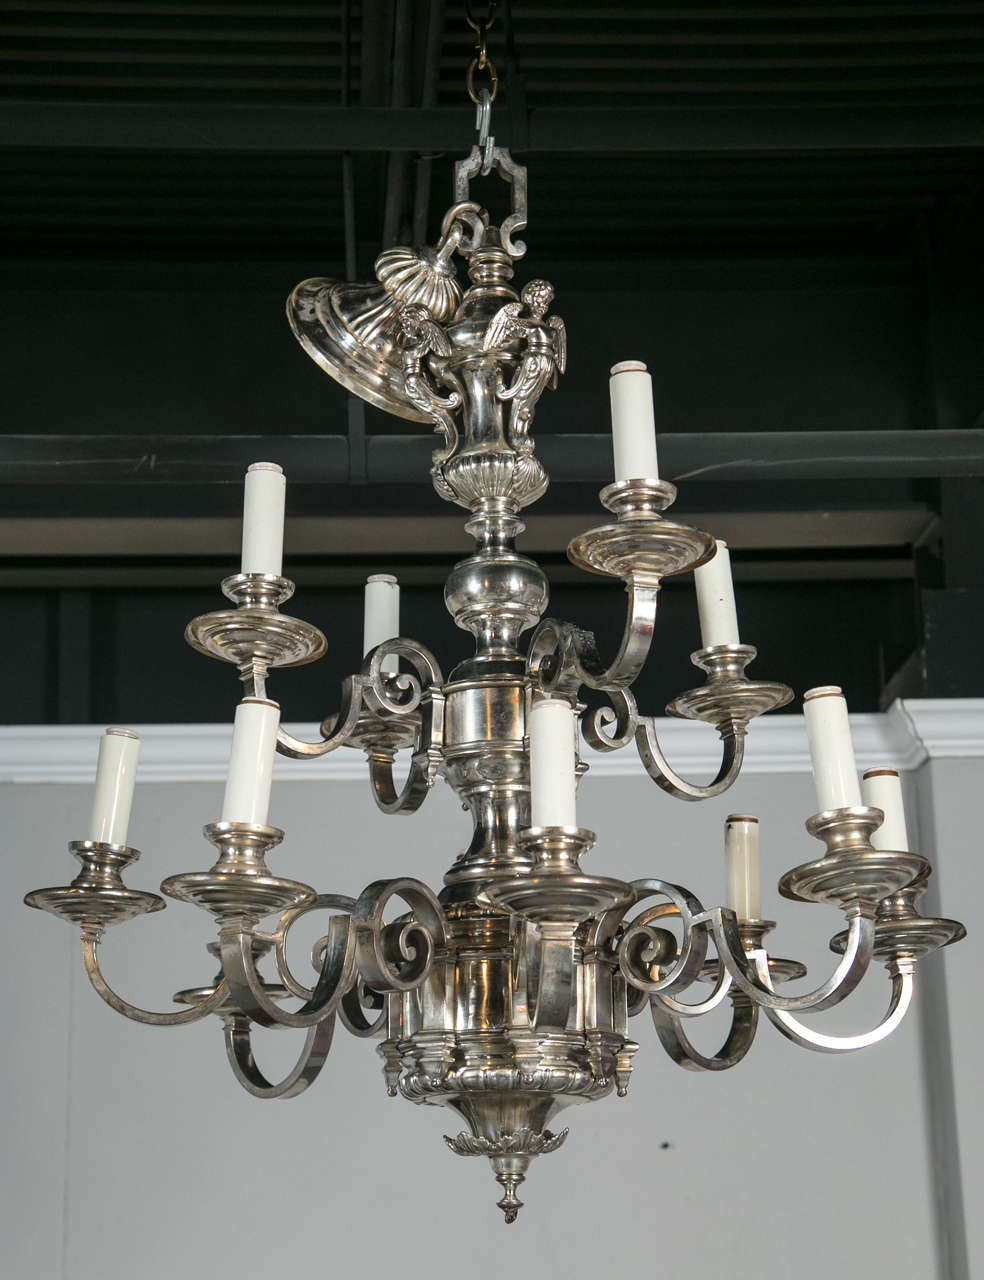 An amazing pair of twelve-light Caldwell chandeliers, circa 1900s. Original silver plated finish.